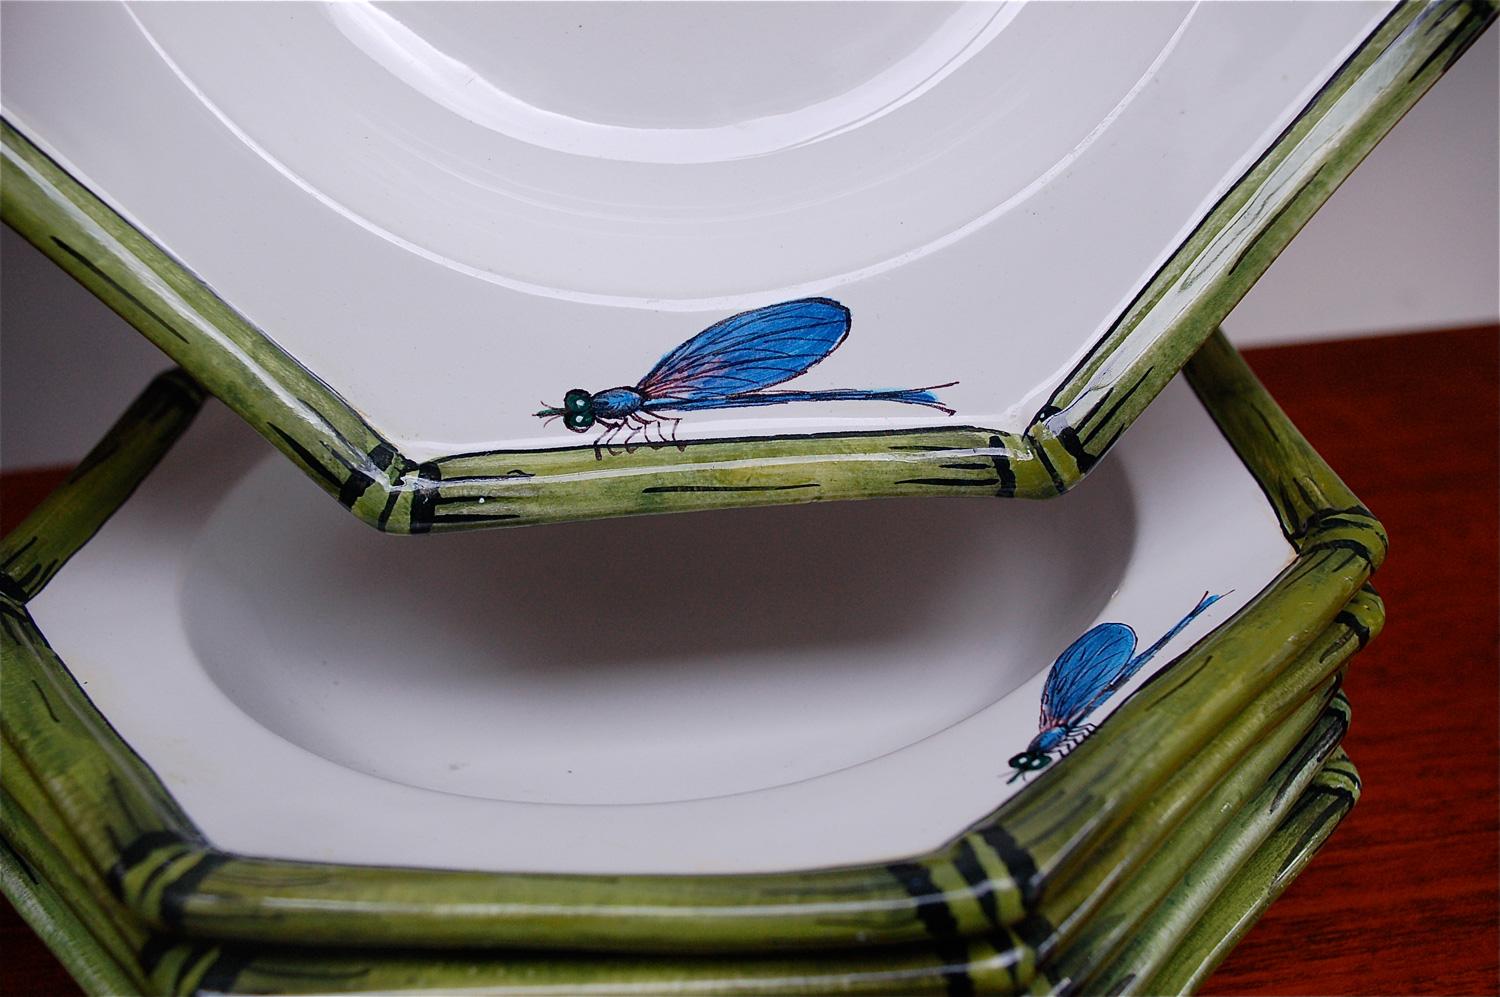 Italian Vintage Soup Plates by COSTA with Bamboo and Dragonfly Decoration, 1970s, Italy For Sale